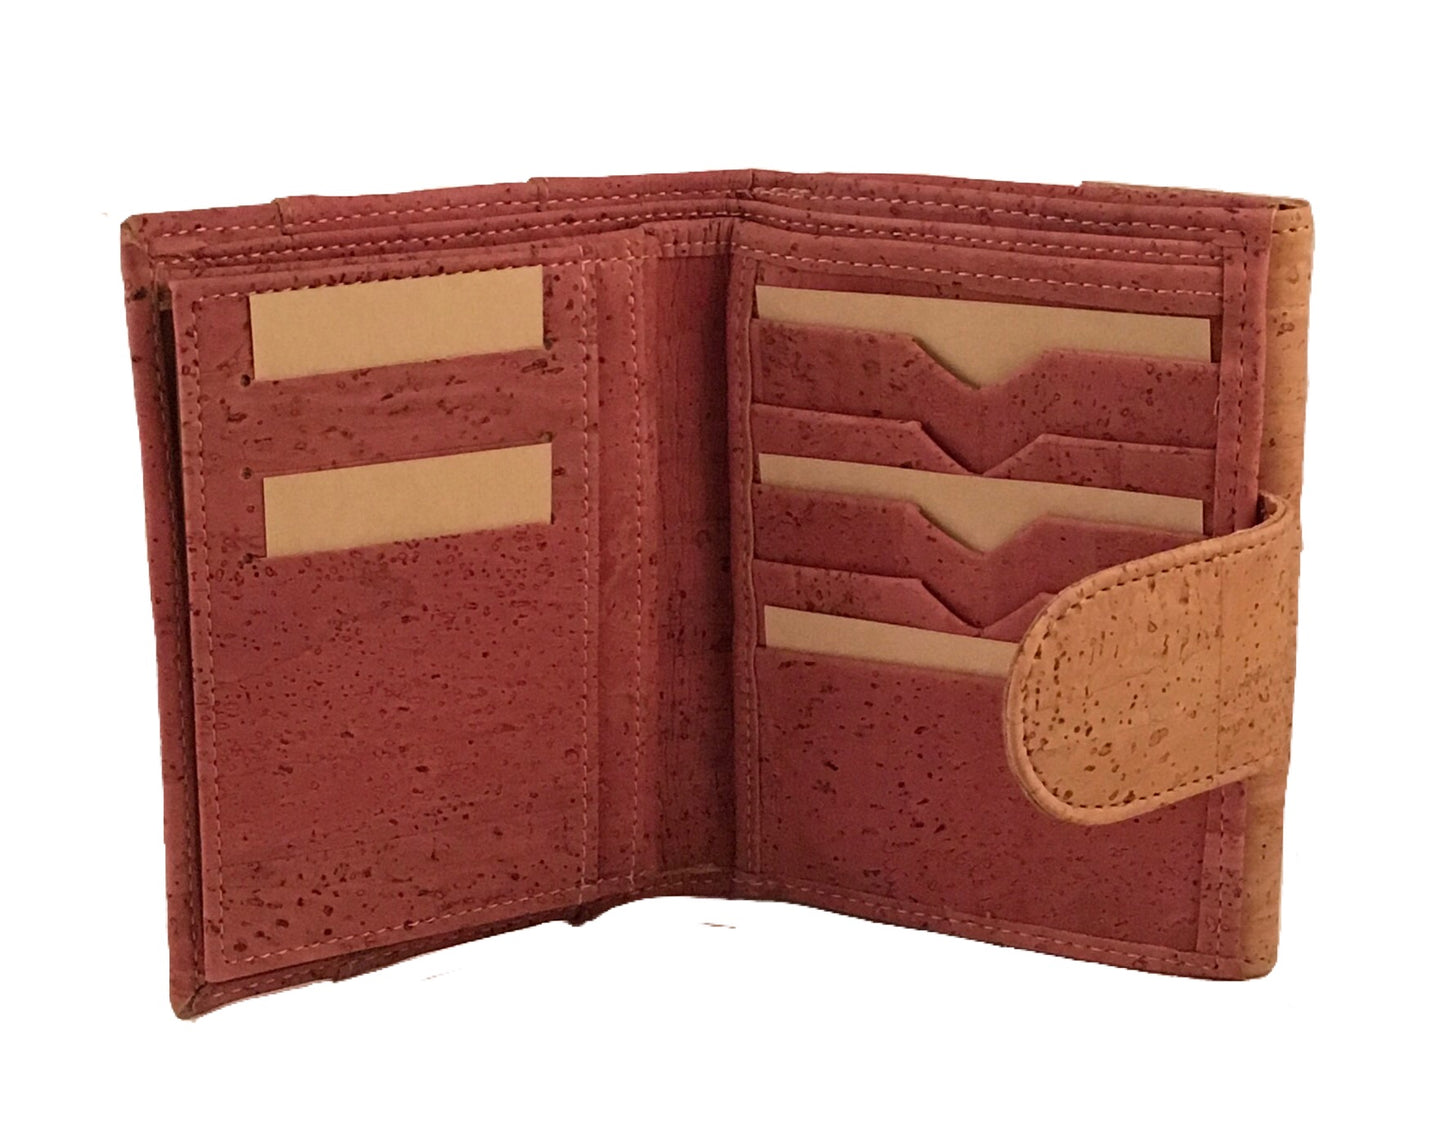 Art For The Cure Pink and Natural Cork Wallet | HowCork - The Cork Marketplace